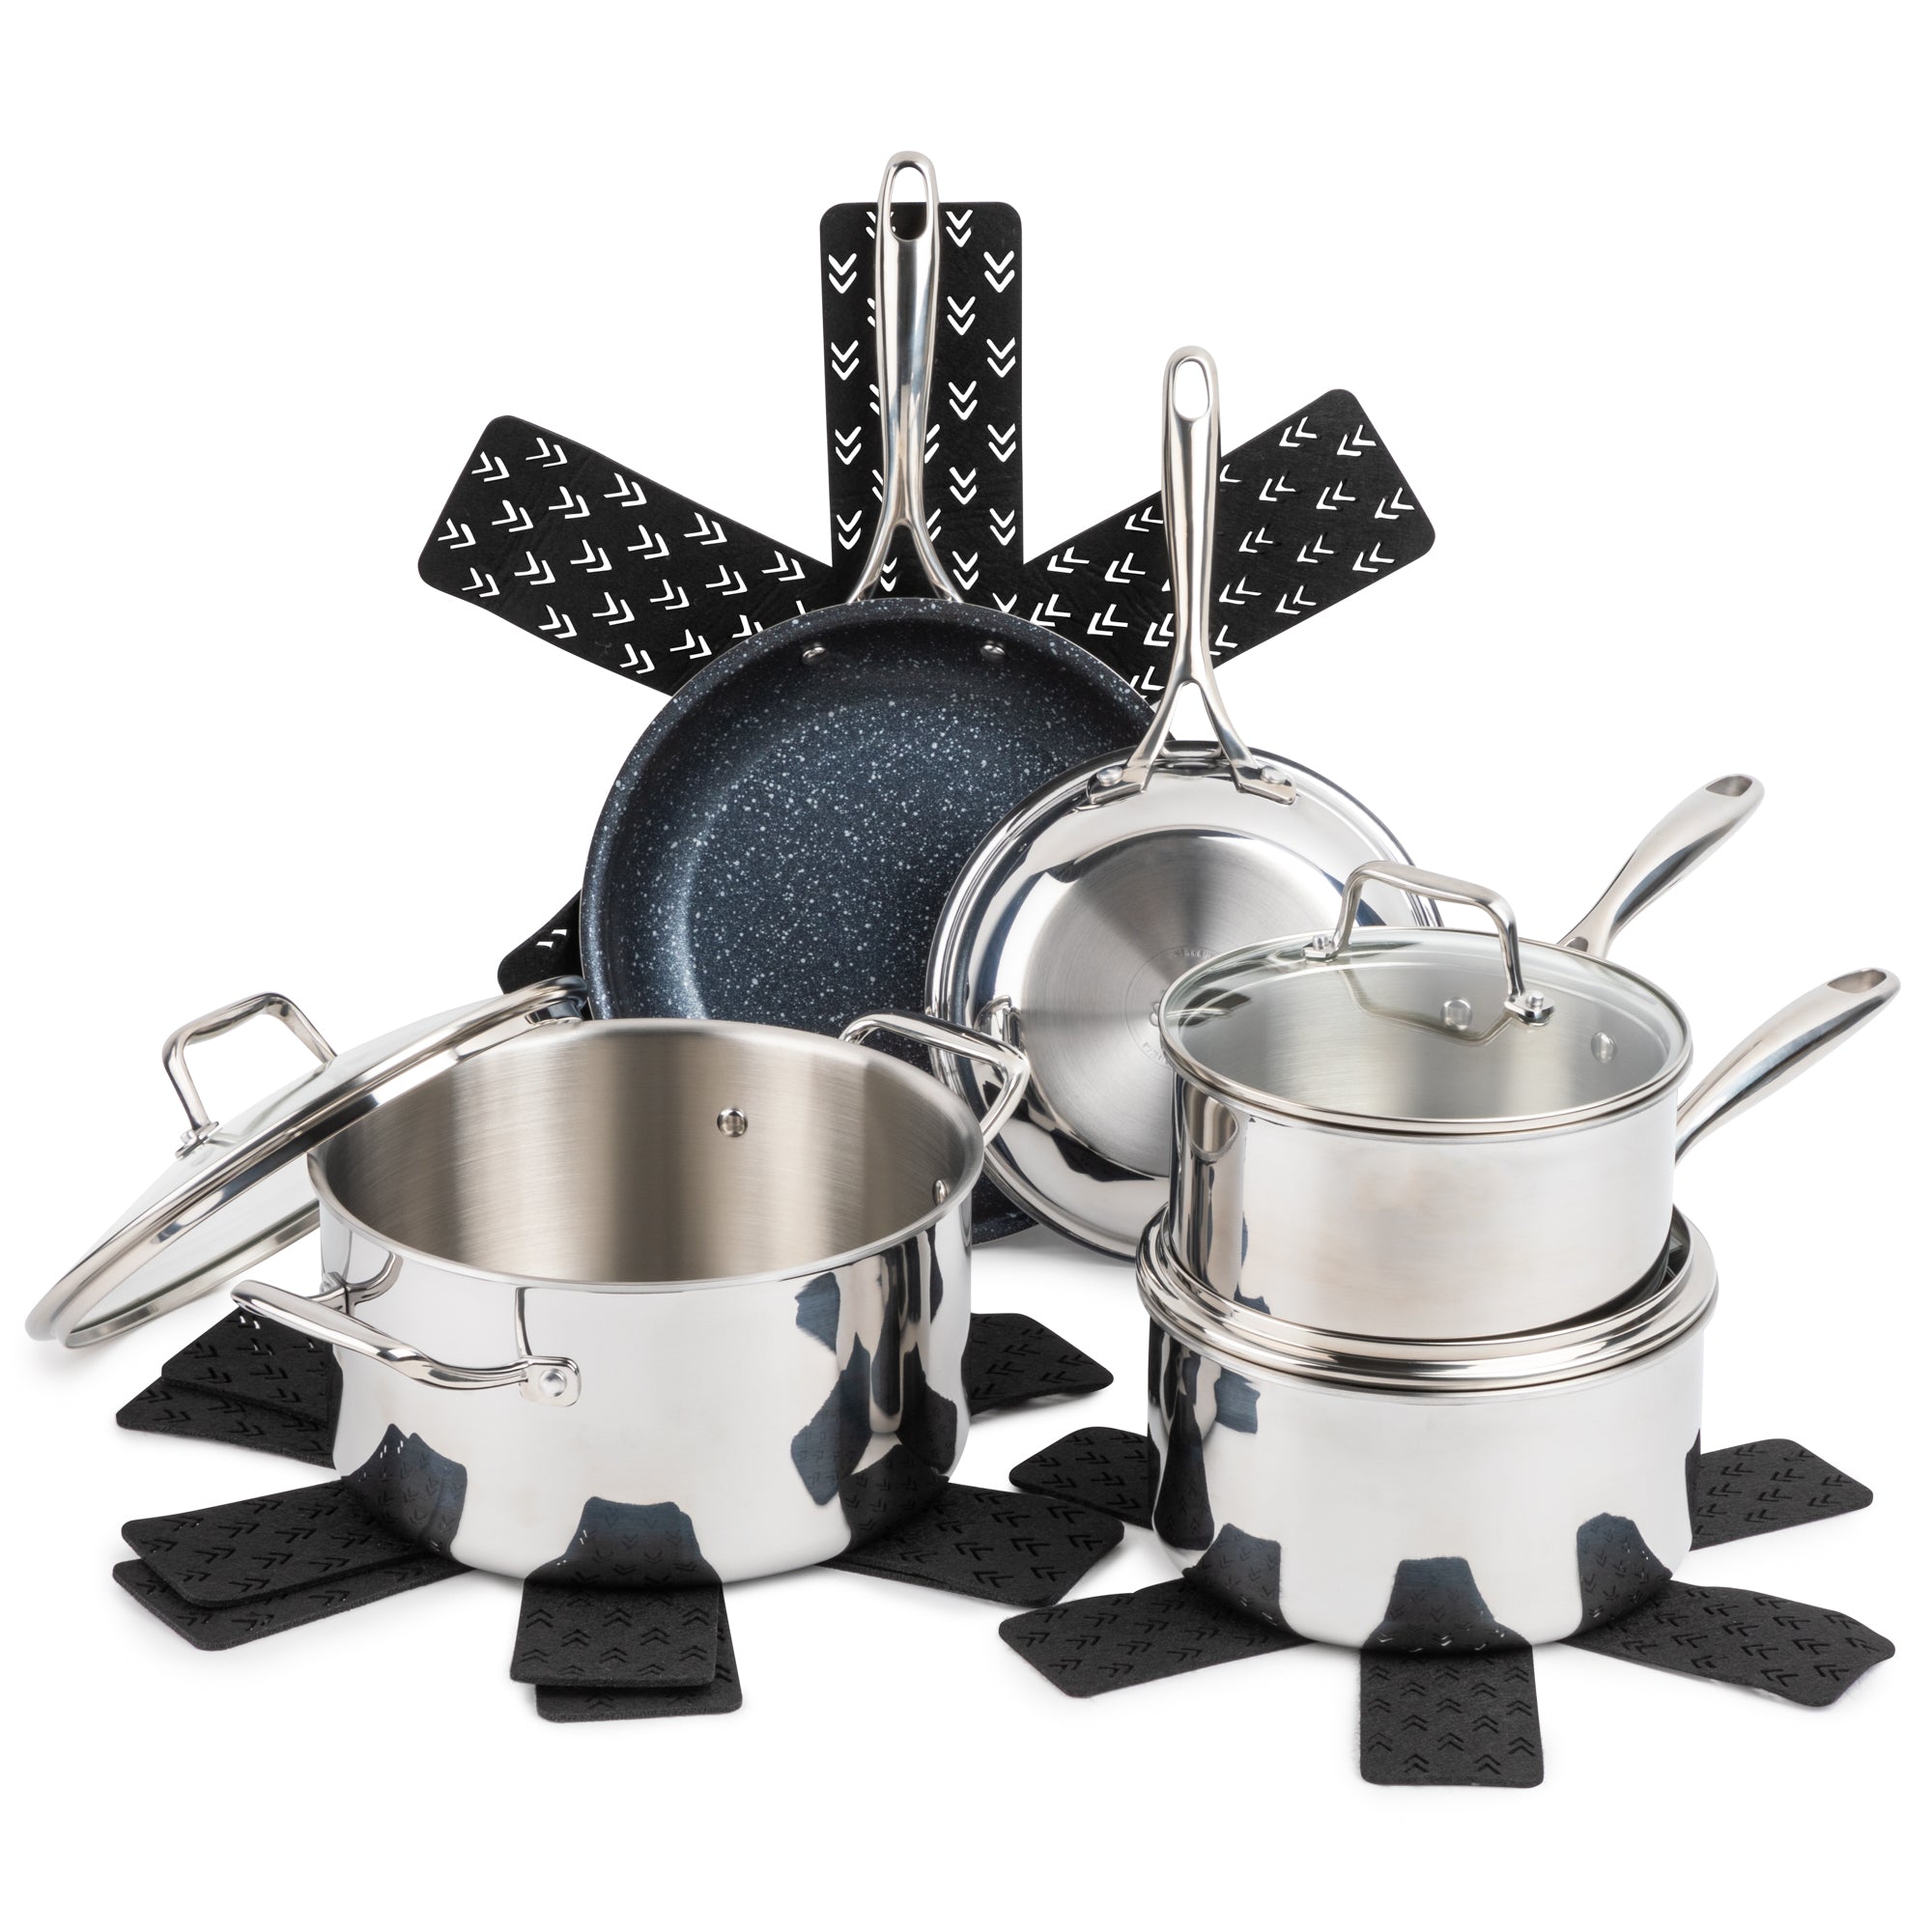 3-Ply Stainless Steel Cookware Set 12-pc | Legend Cookware